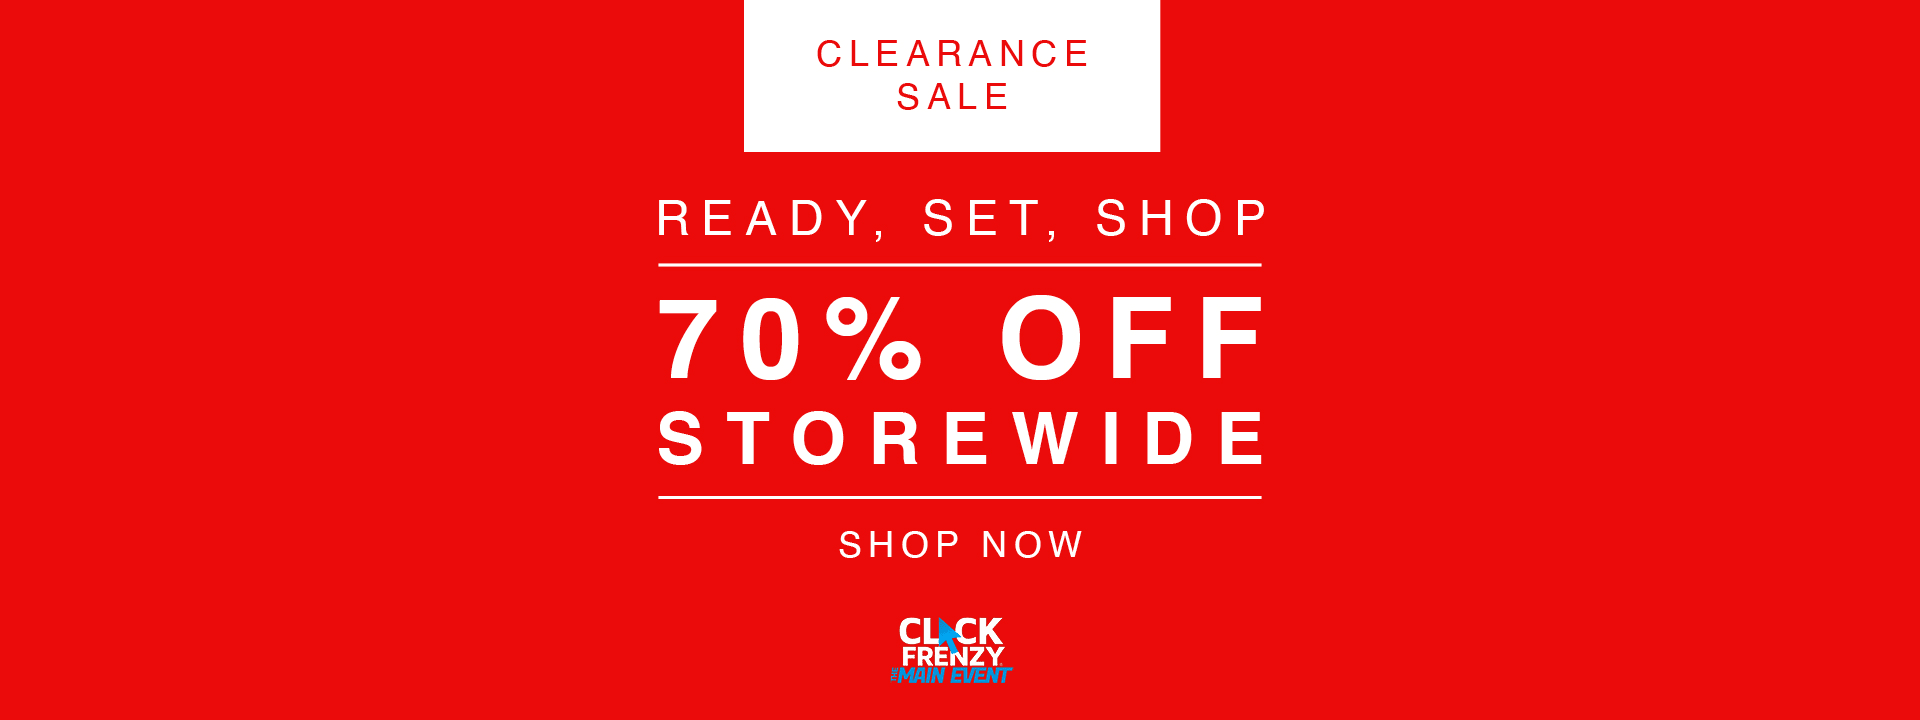 Clearance sale 70% OFF storewide on suits, blazers, coats & more